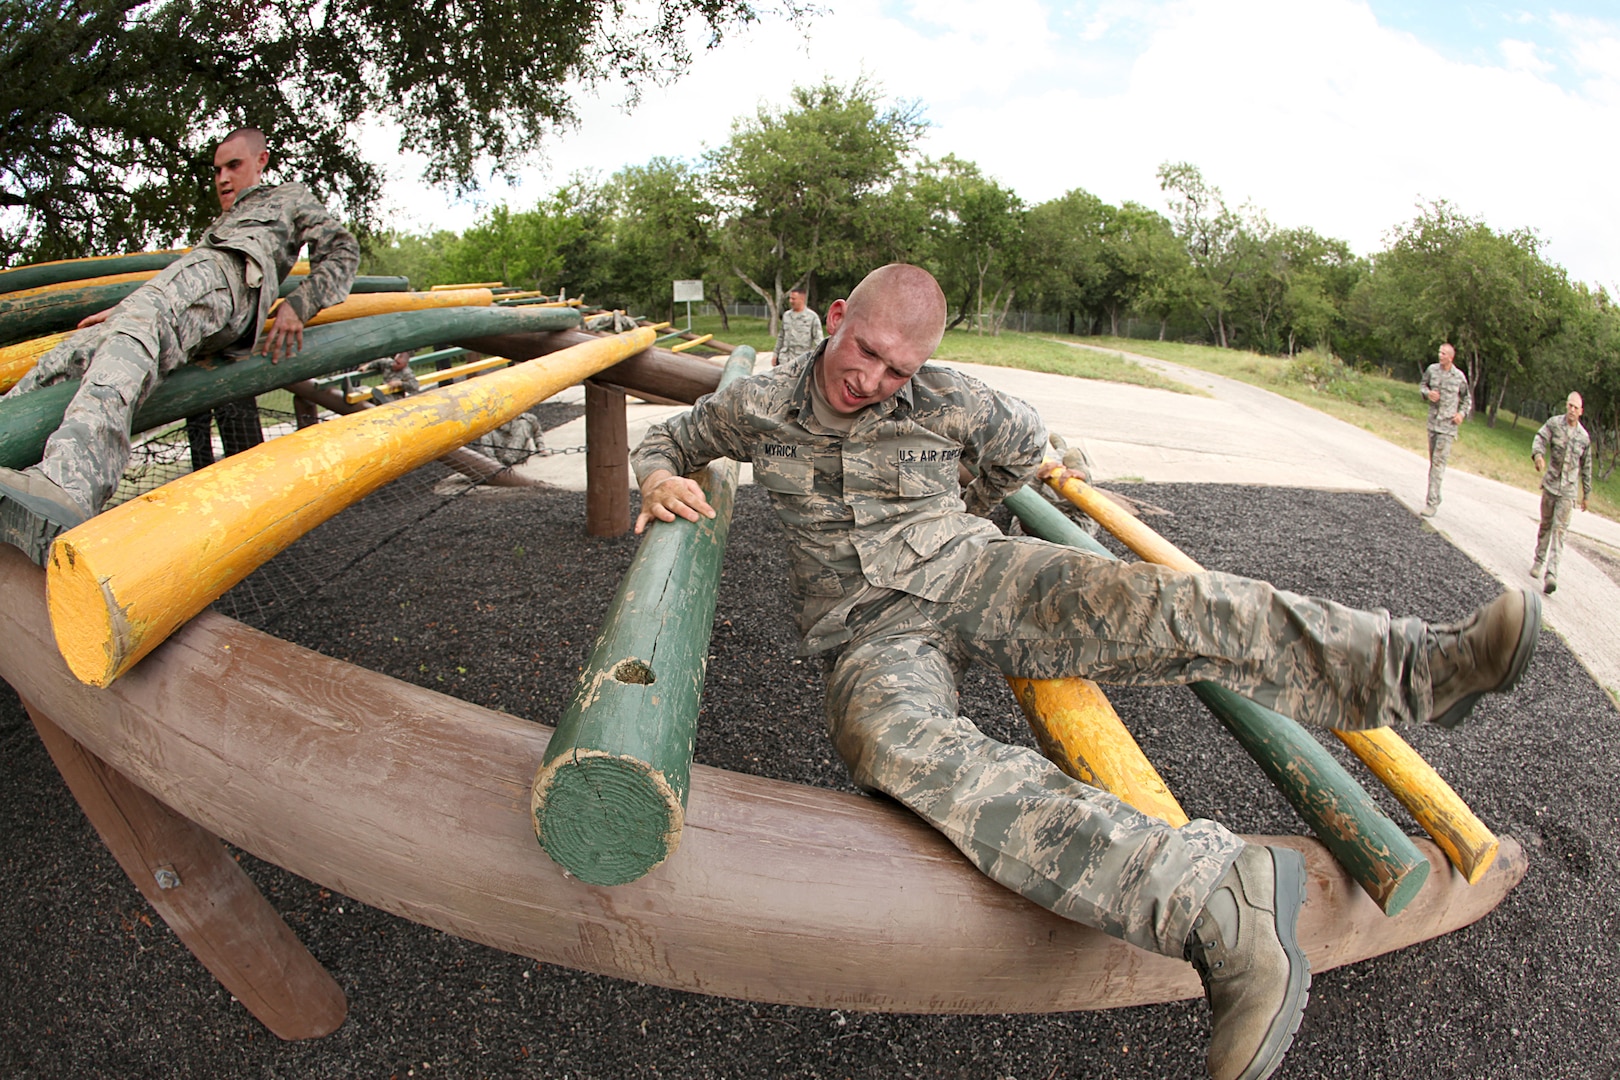 Trainees from basic miiltary training navigate an obstacle June 30. In addition to fitness training and military studies, Air Force basic military training trainees are taught foundational Air Force information including core values, customs and courtesies, and basic policies and procedures. (U.S. Air Force photo/Robbin Cresswell)